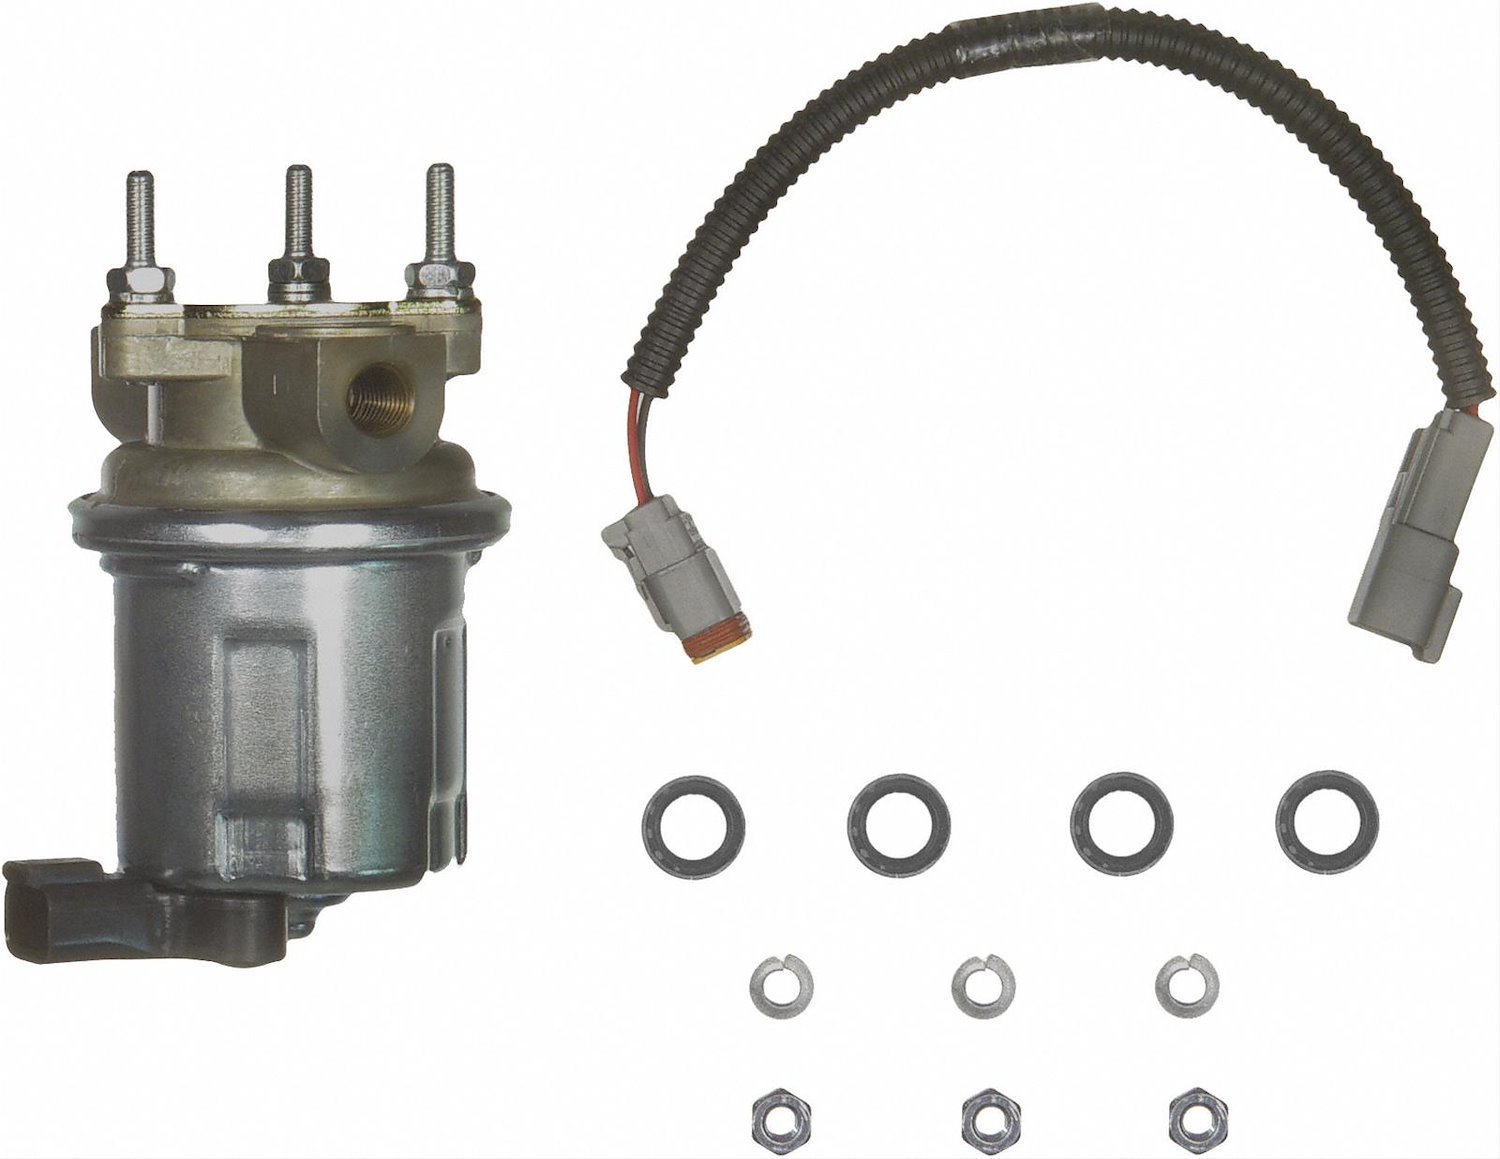 Replacement In-Line Electric Fuel Pump for 1997-2002 Dodge Ram 2500/3500